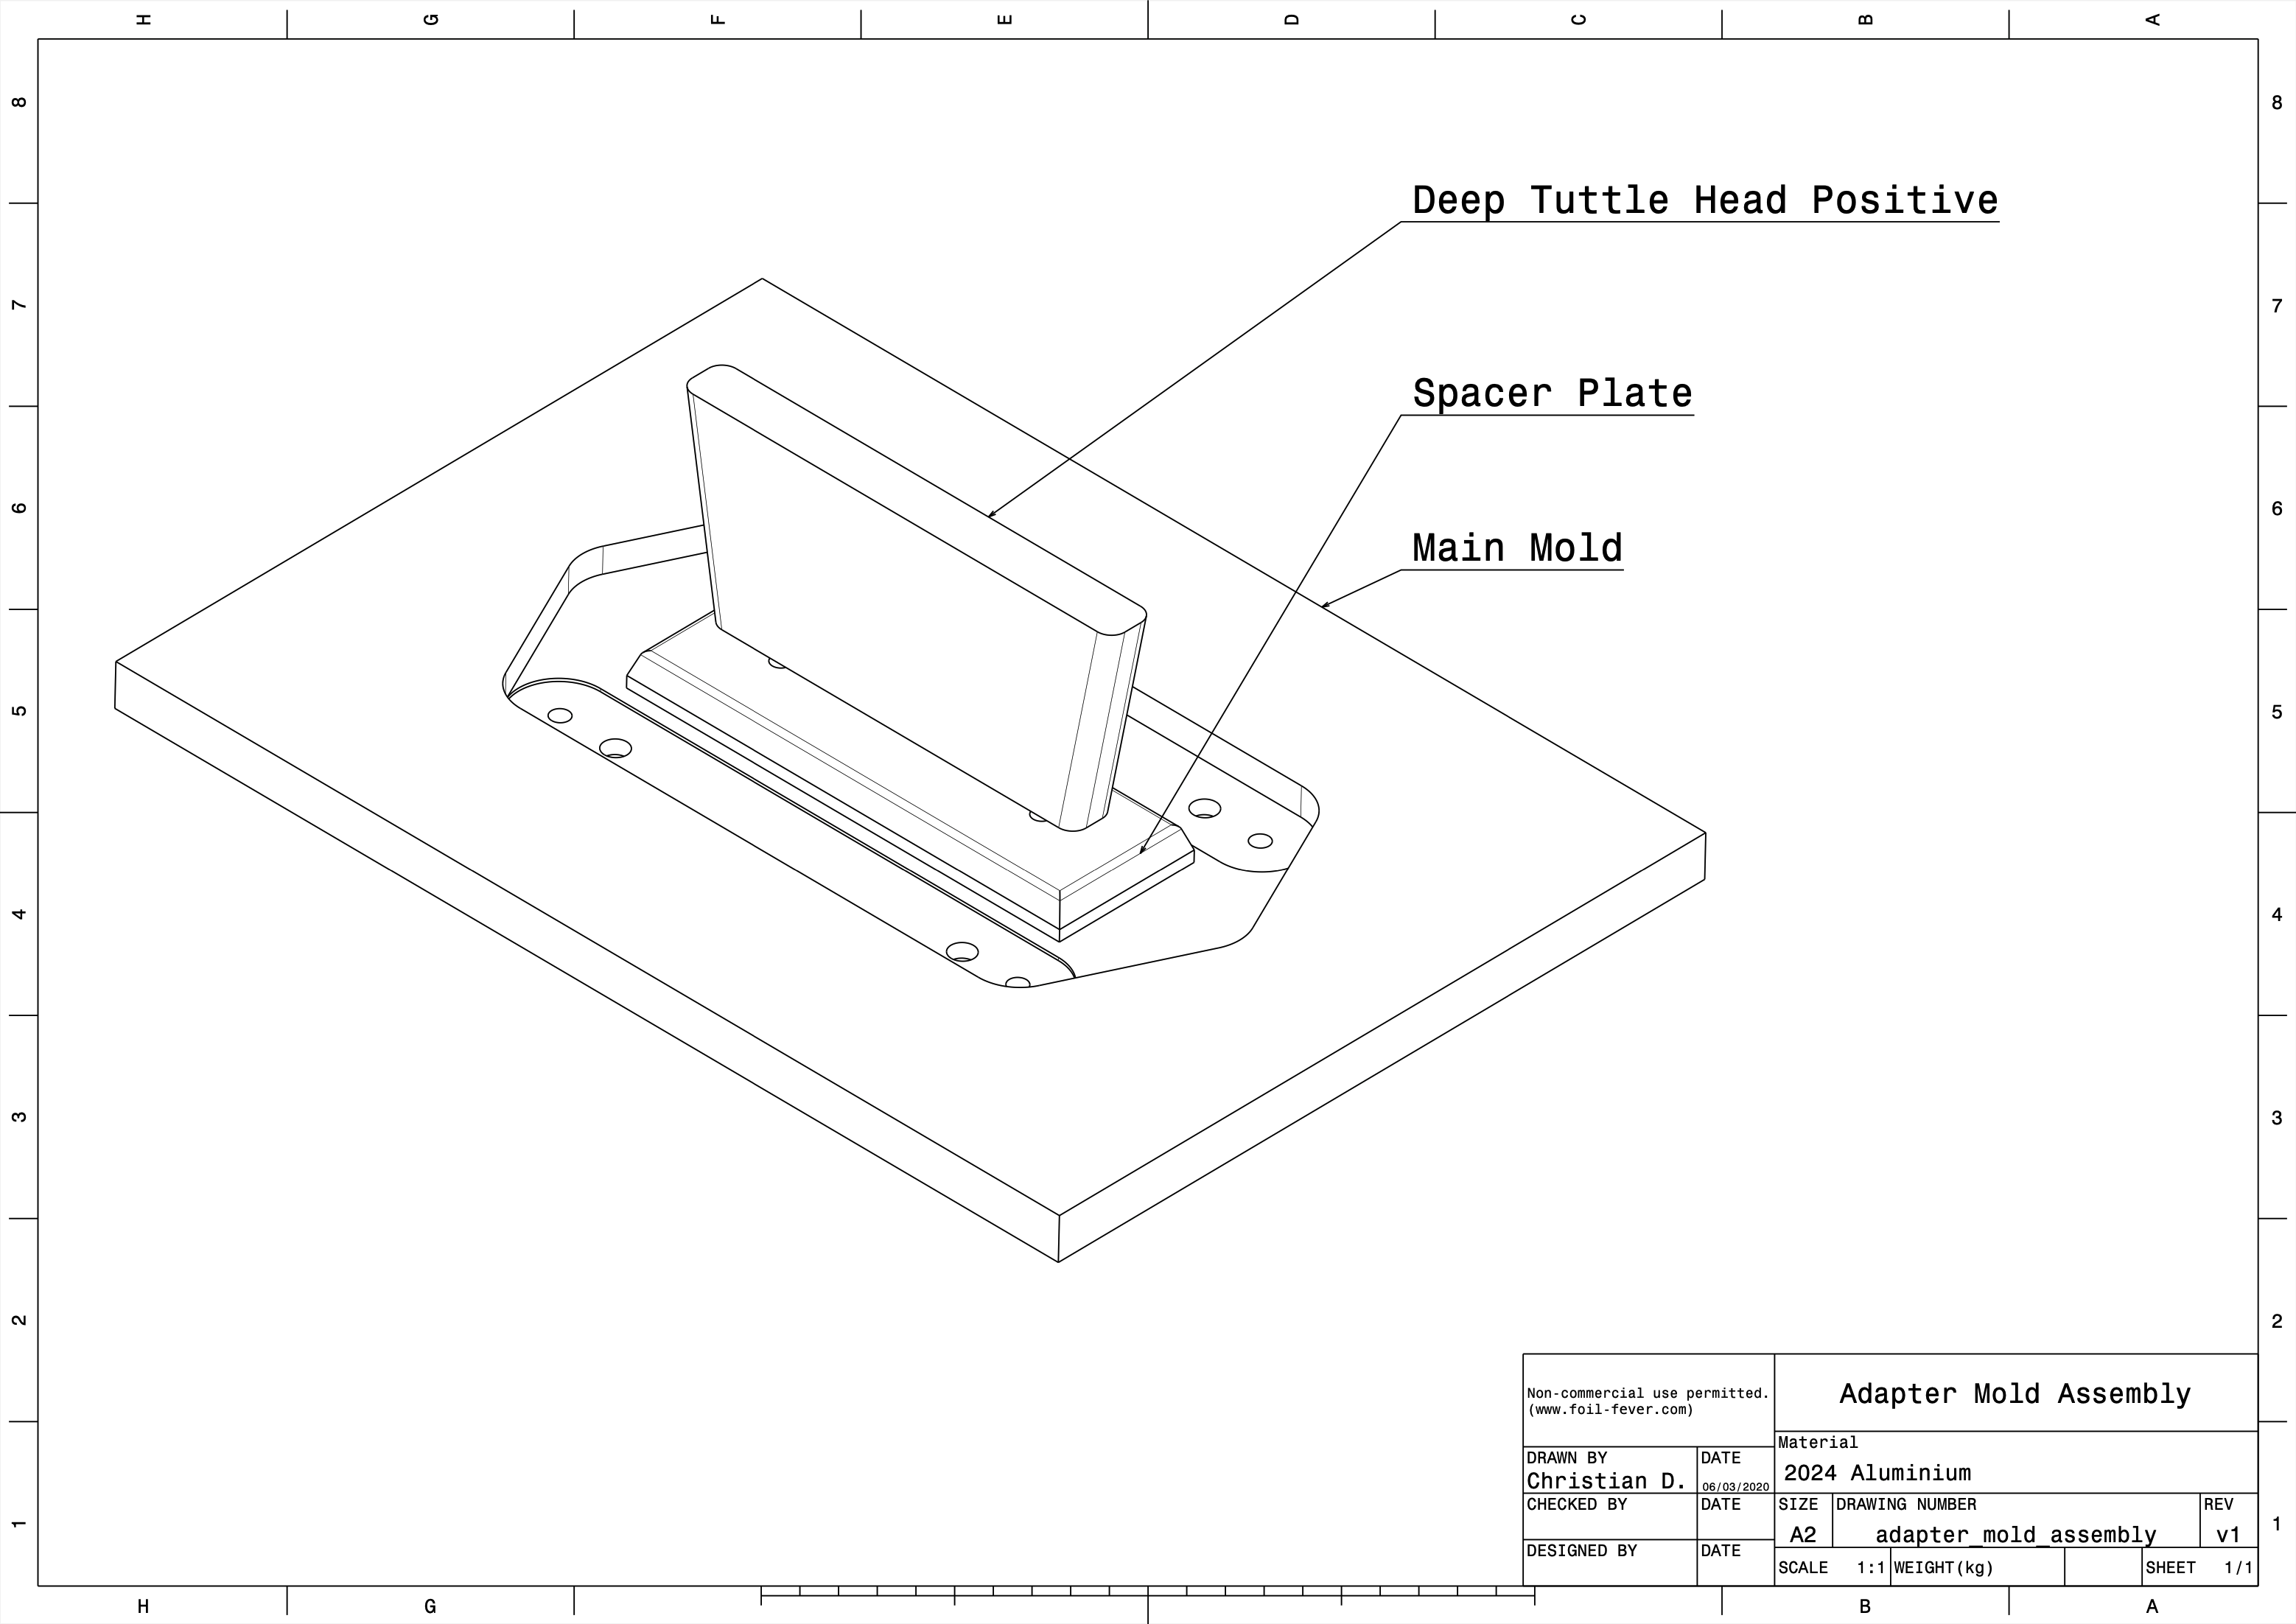 Adapter Mold Assembly